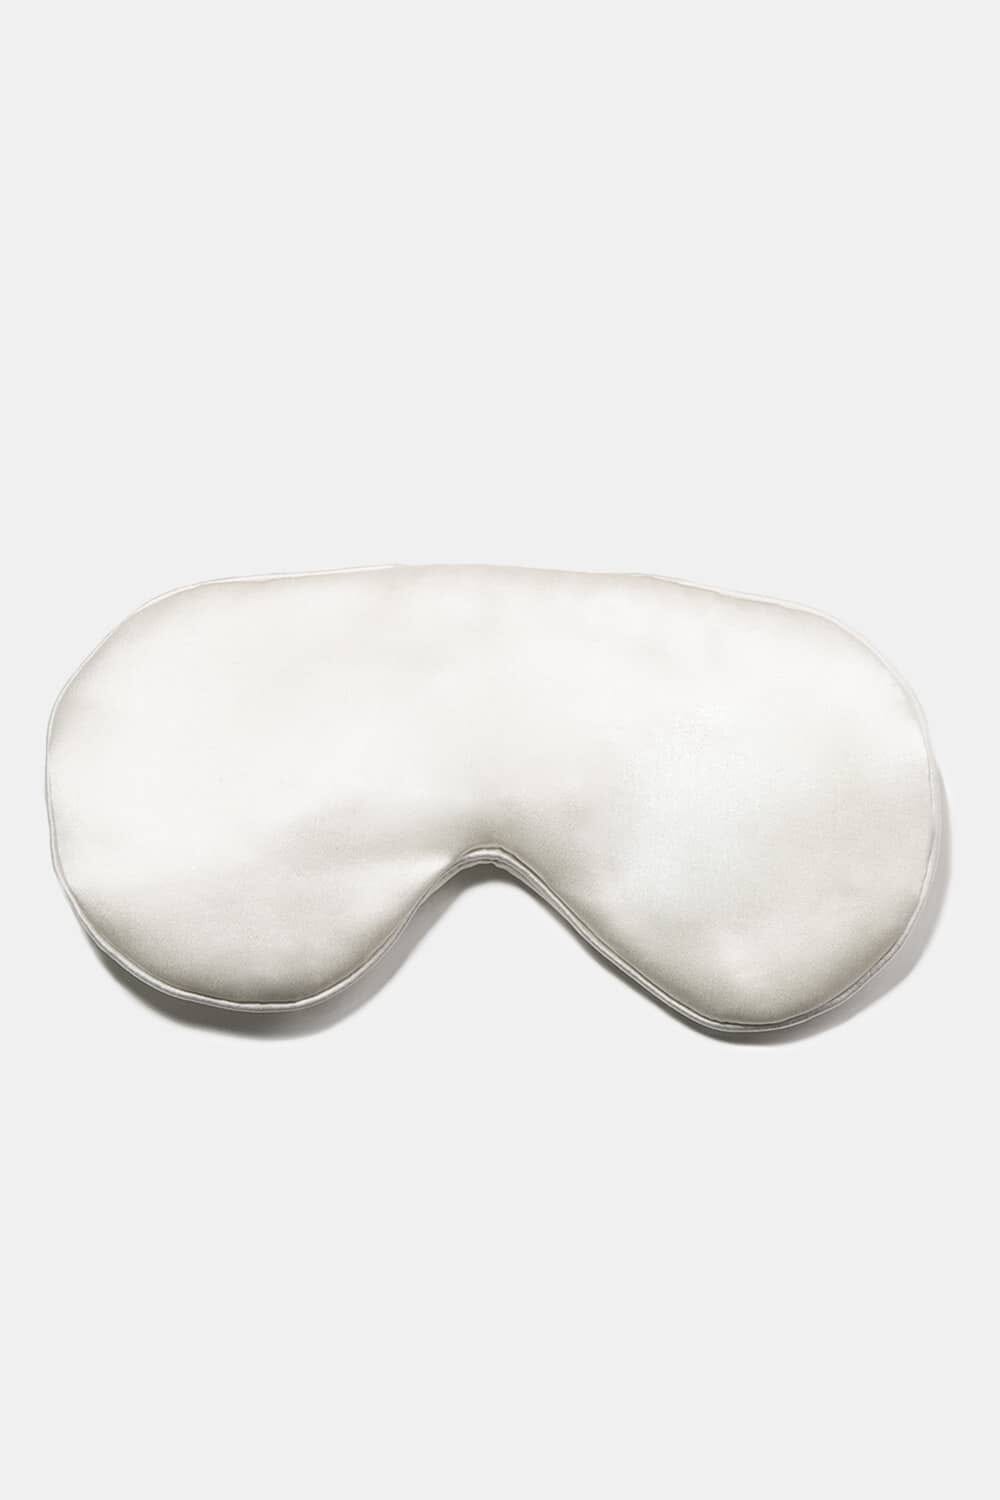 100% Mulberry Silk Therapeutic Sleep Mask - 25 Momme Beauty>Masks Fishers Finery Natural White (Undyed) Adjustable 